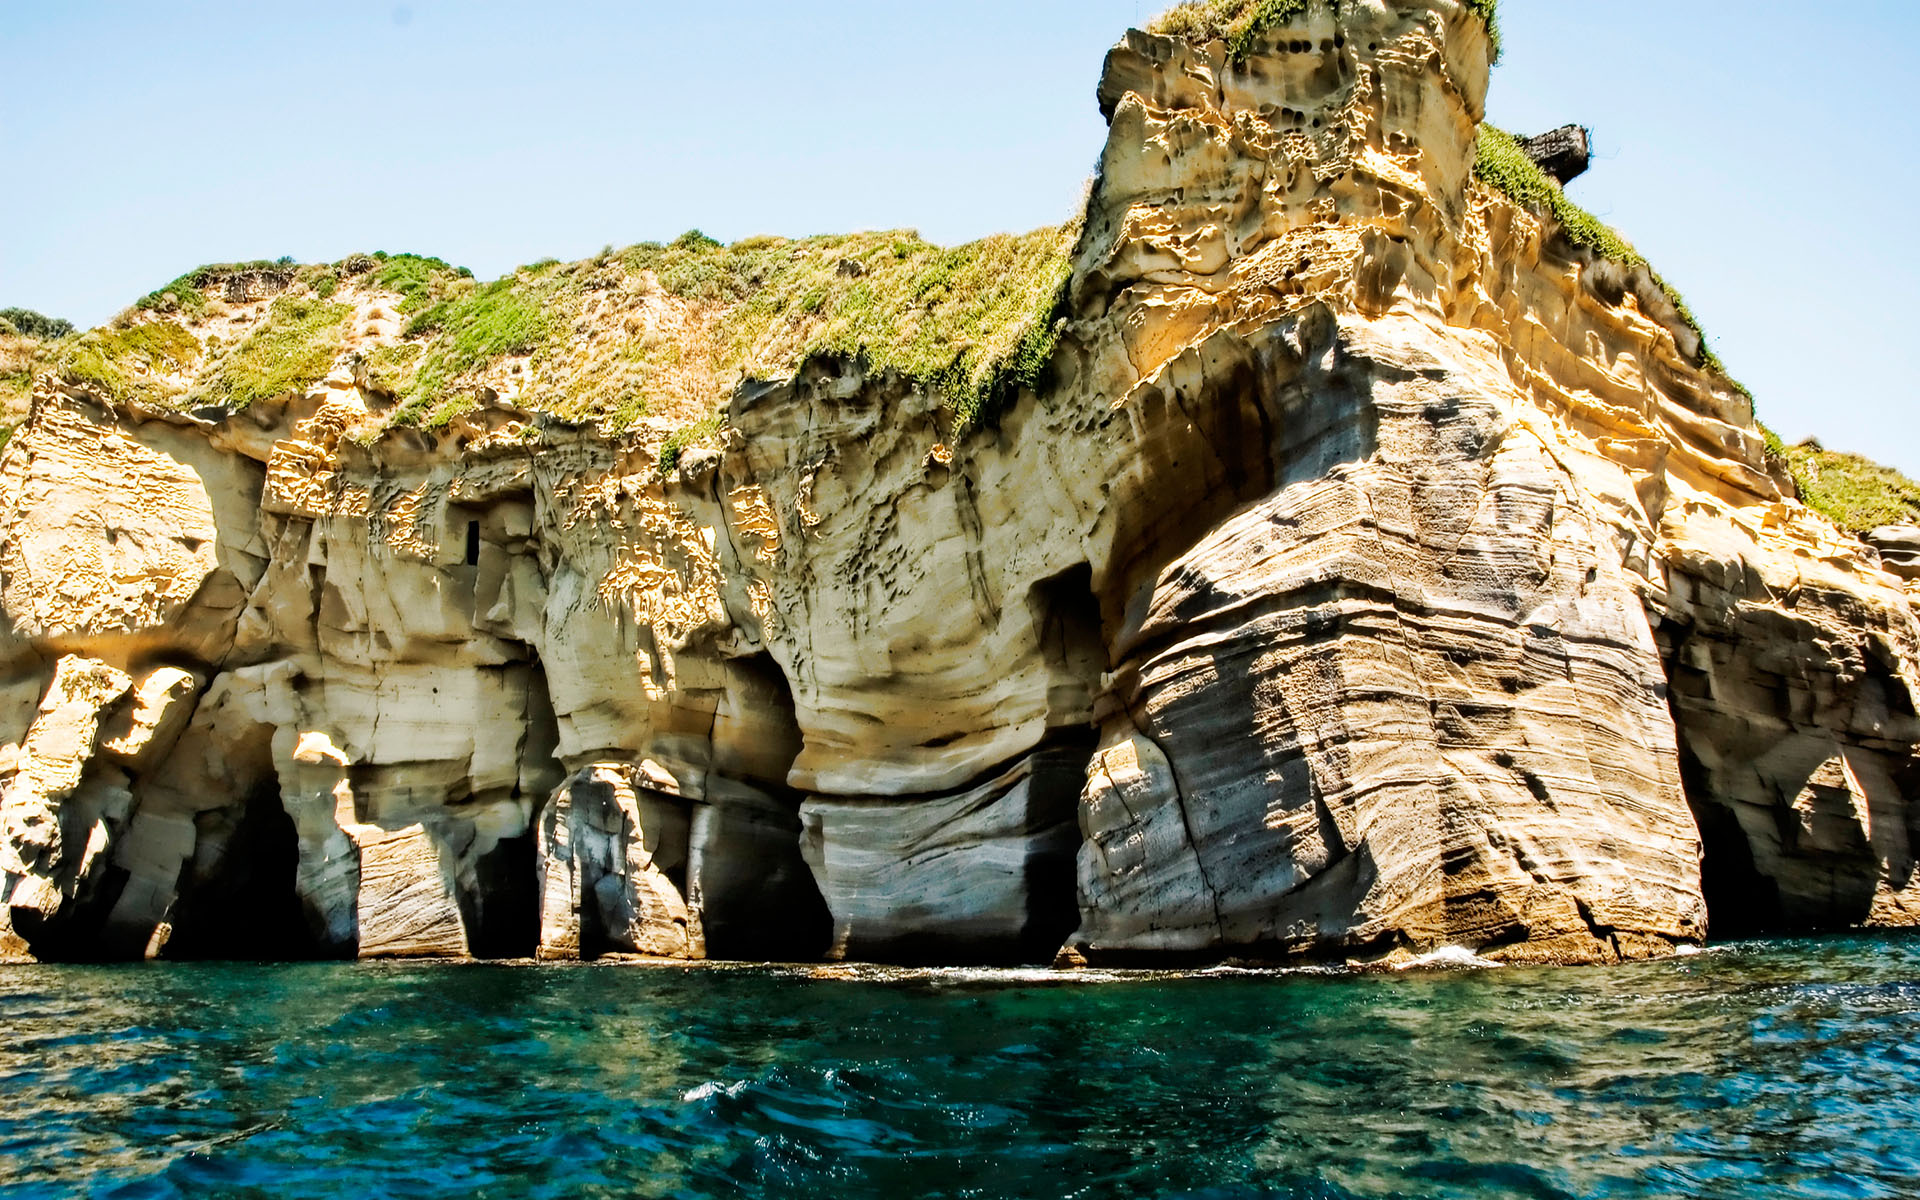 Majestic cave nestled along a rocky shoreline with breathtaking ocean views.